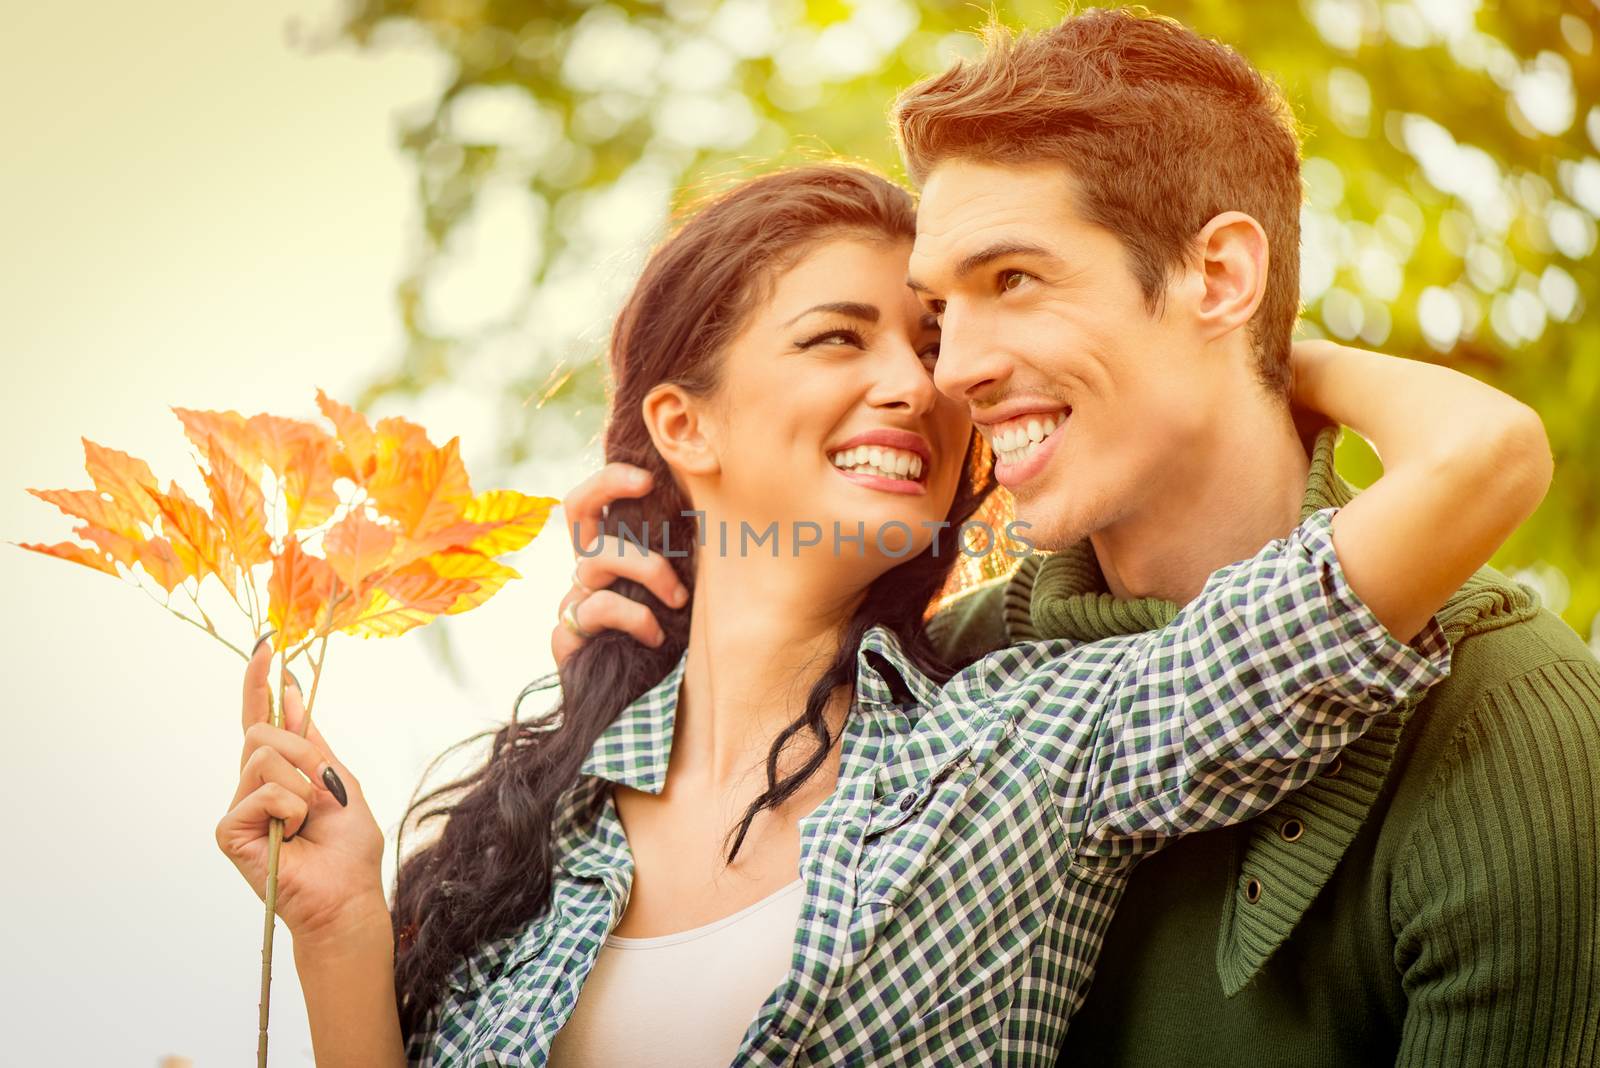 Close-up of a young embraced heterosexual couple with a smile.